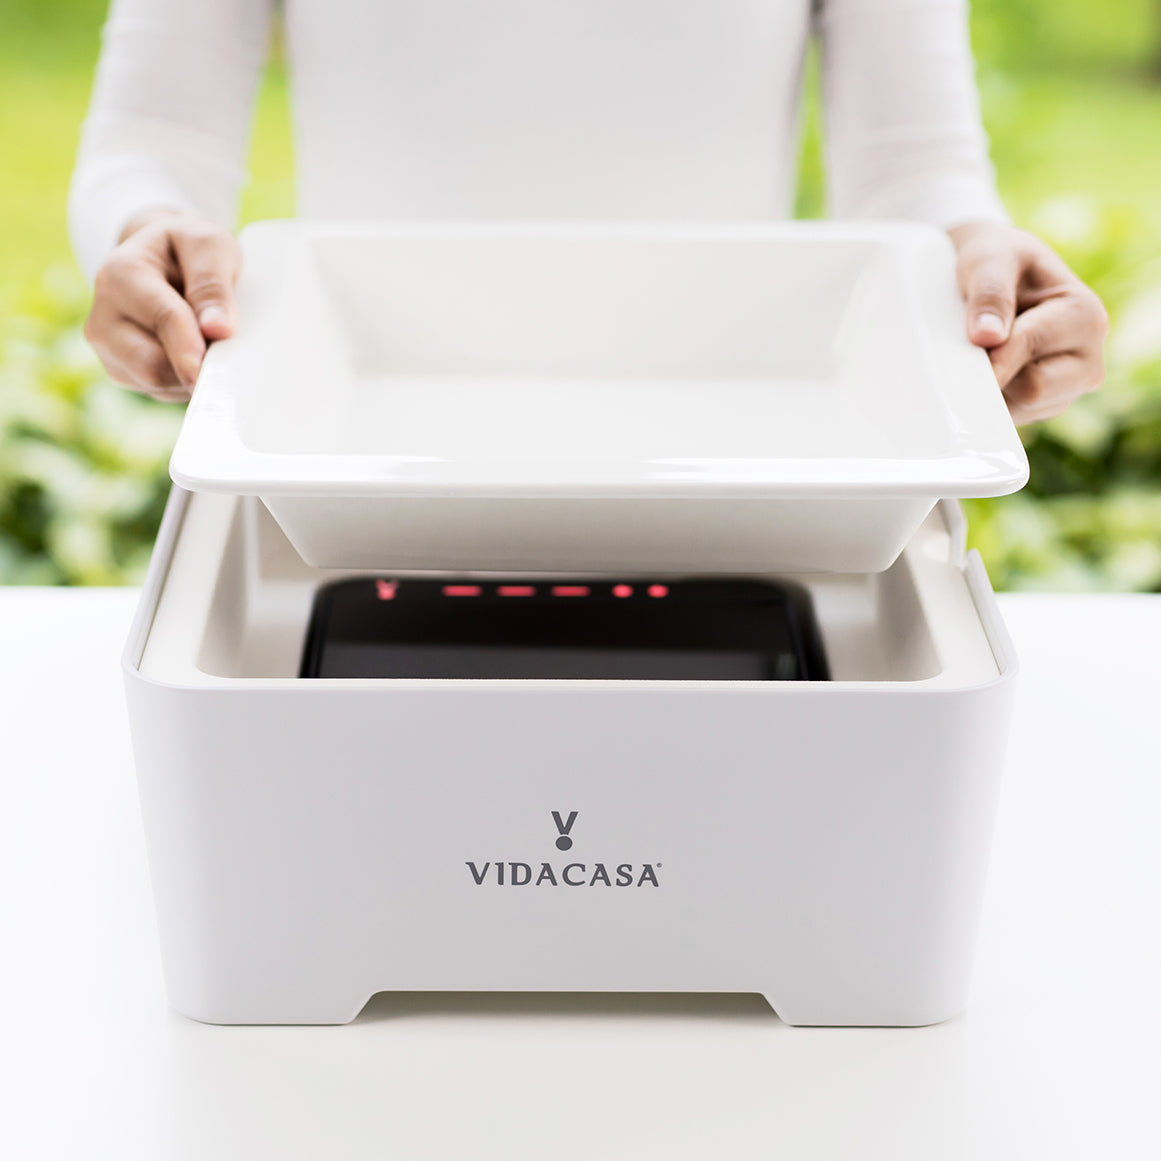 Vidacasa® H1X food warmer is the most reliable wireless electric heating plate that can maintain cooked food warm for hours without dangling cords, chafing fuels or tealight candles. 